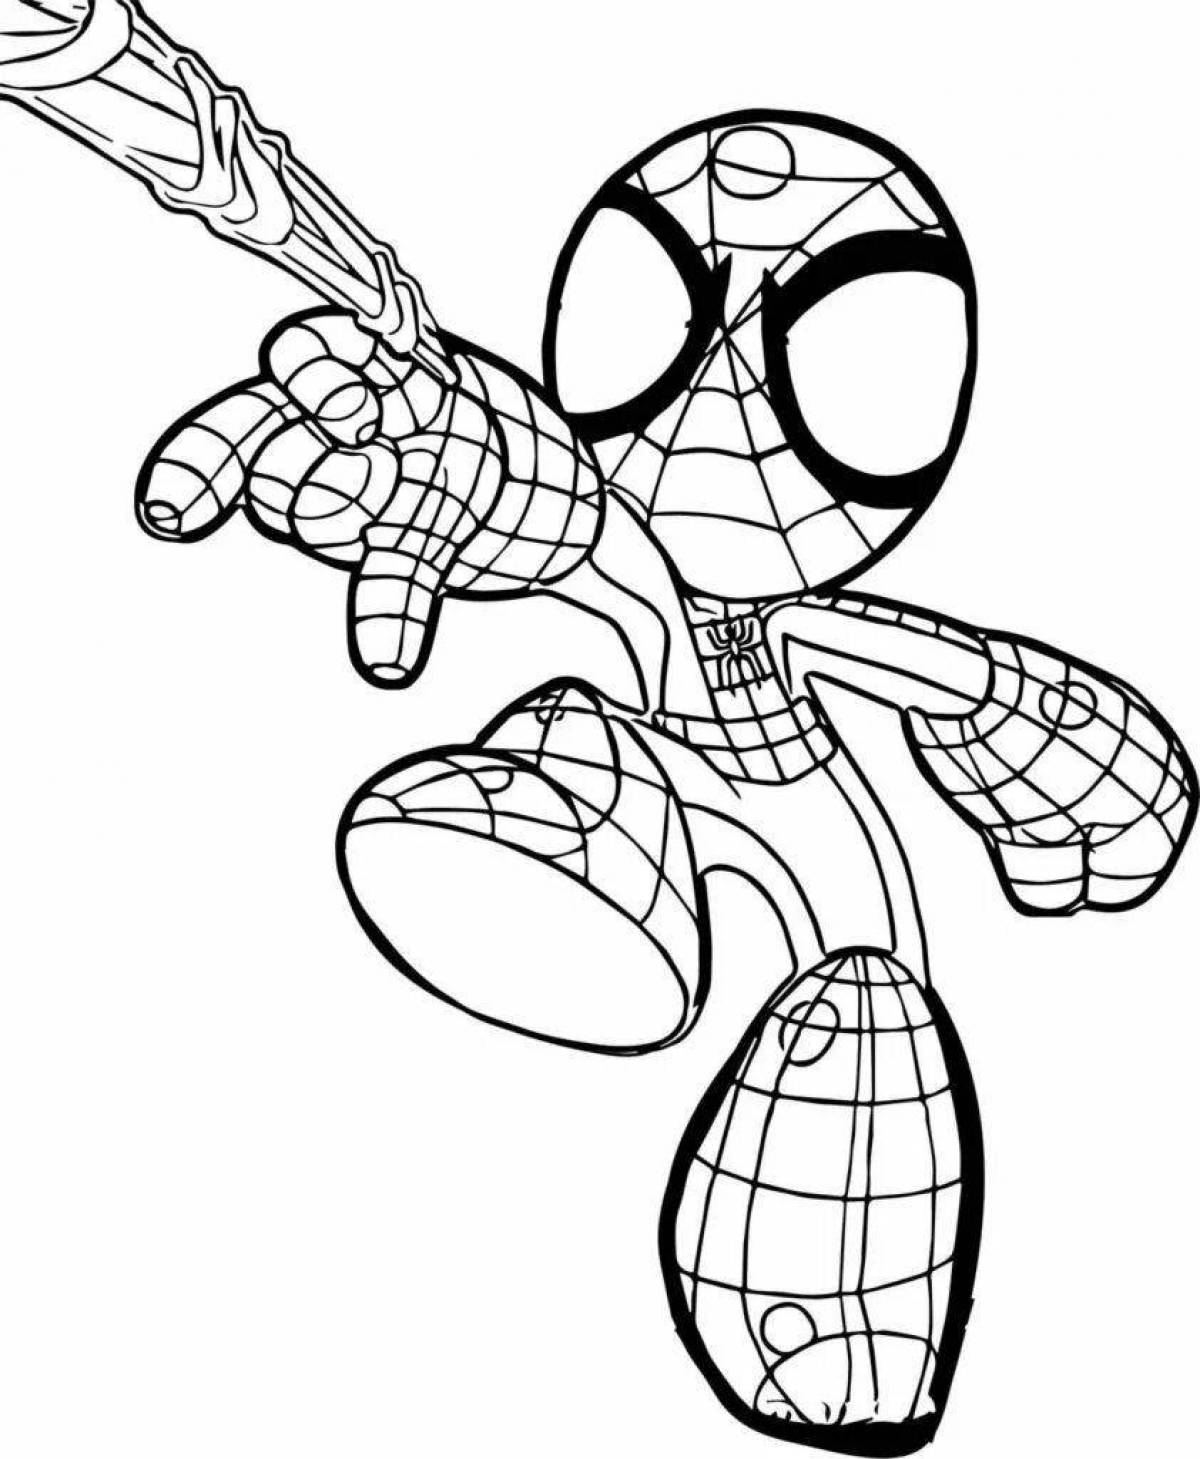 Spiderman's terrifying ghost coloring page